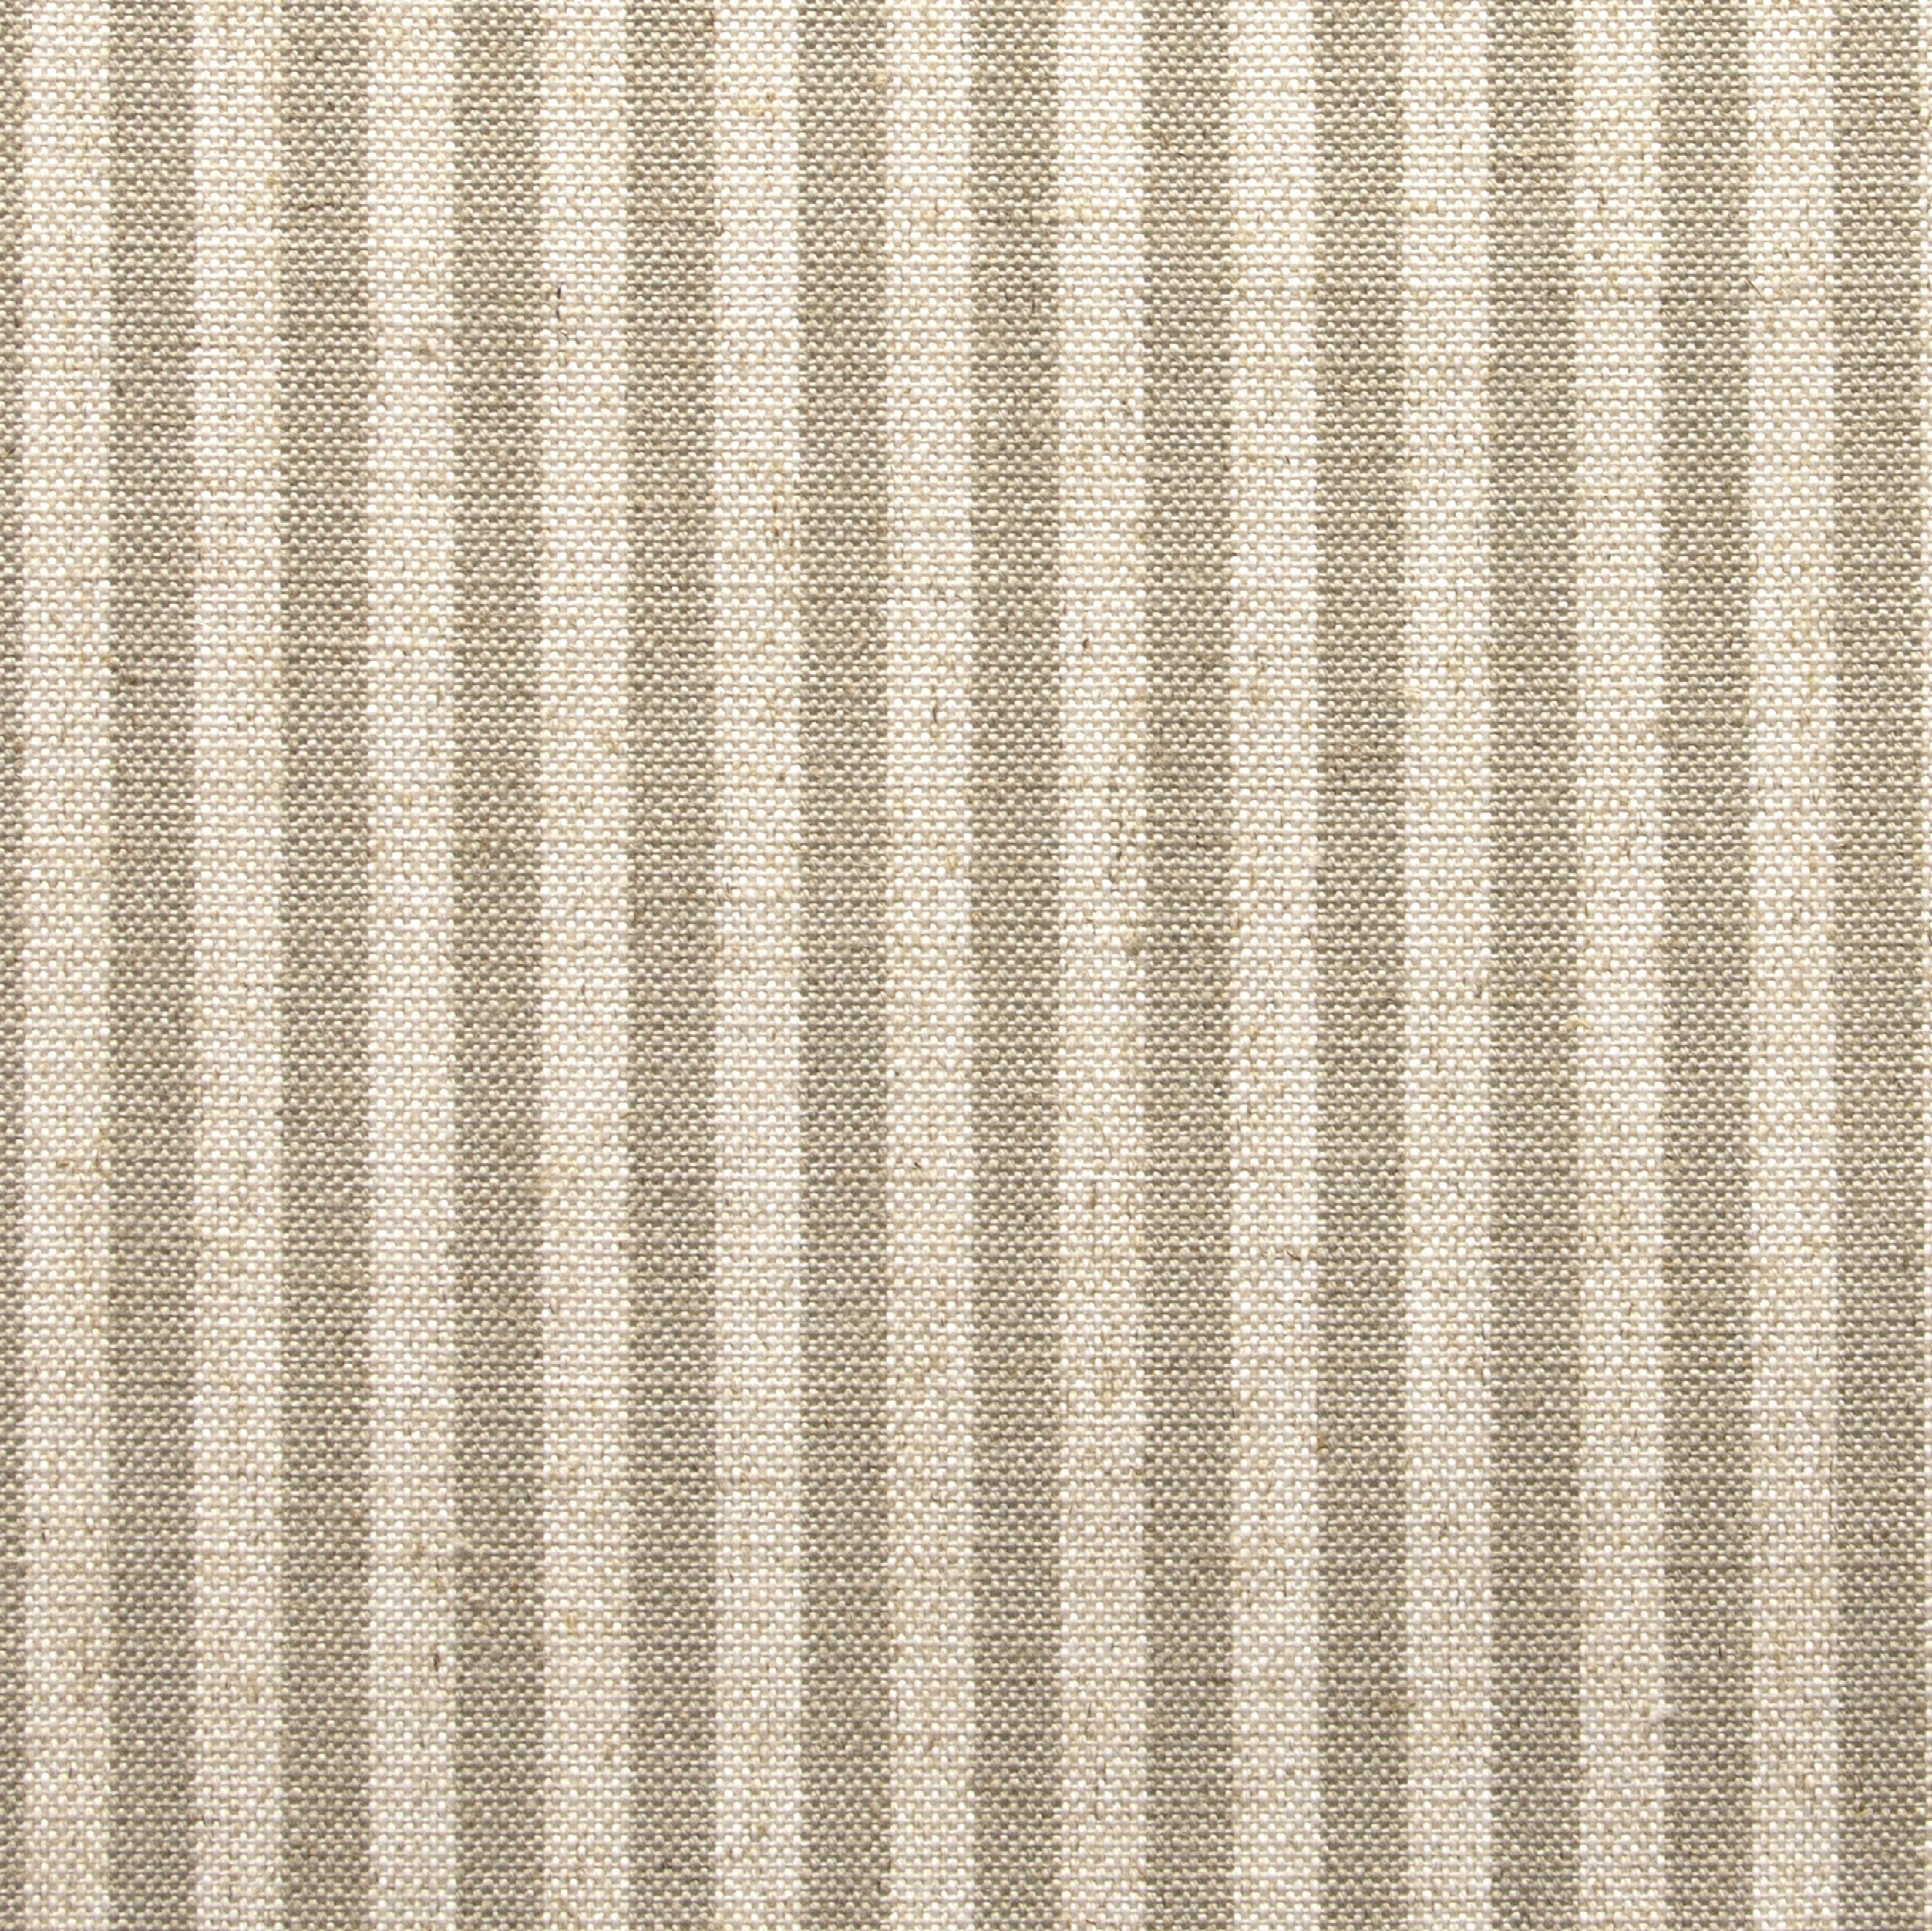 Nicola Settee in Scout Stripe Taupe - Image 5